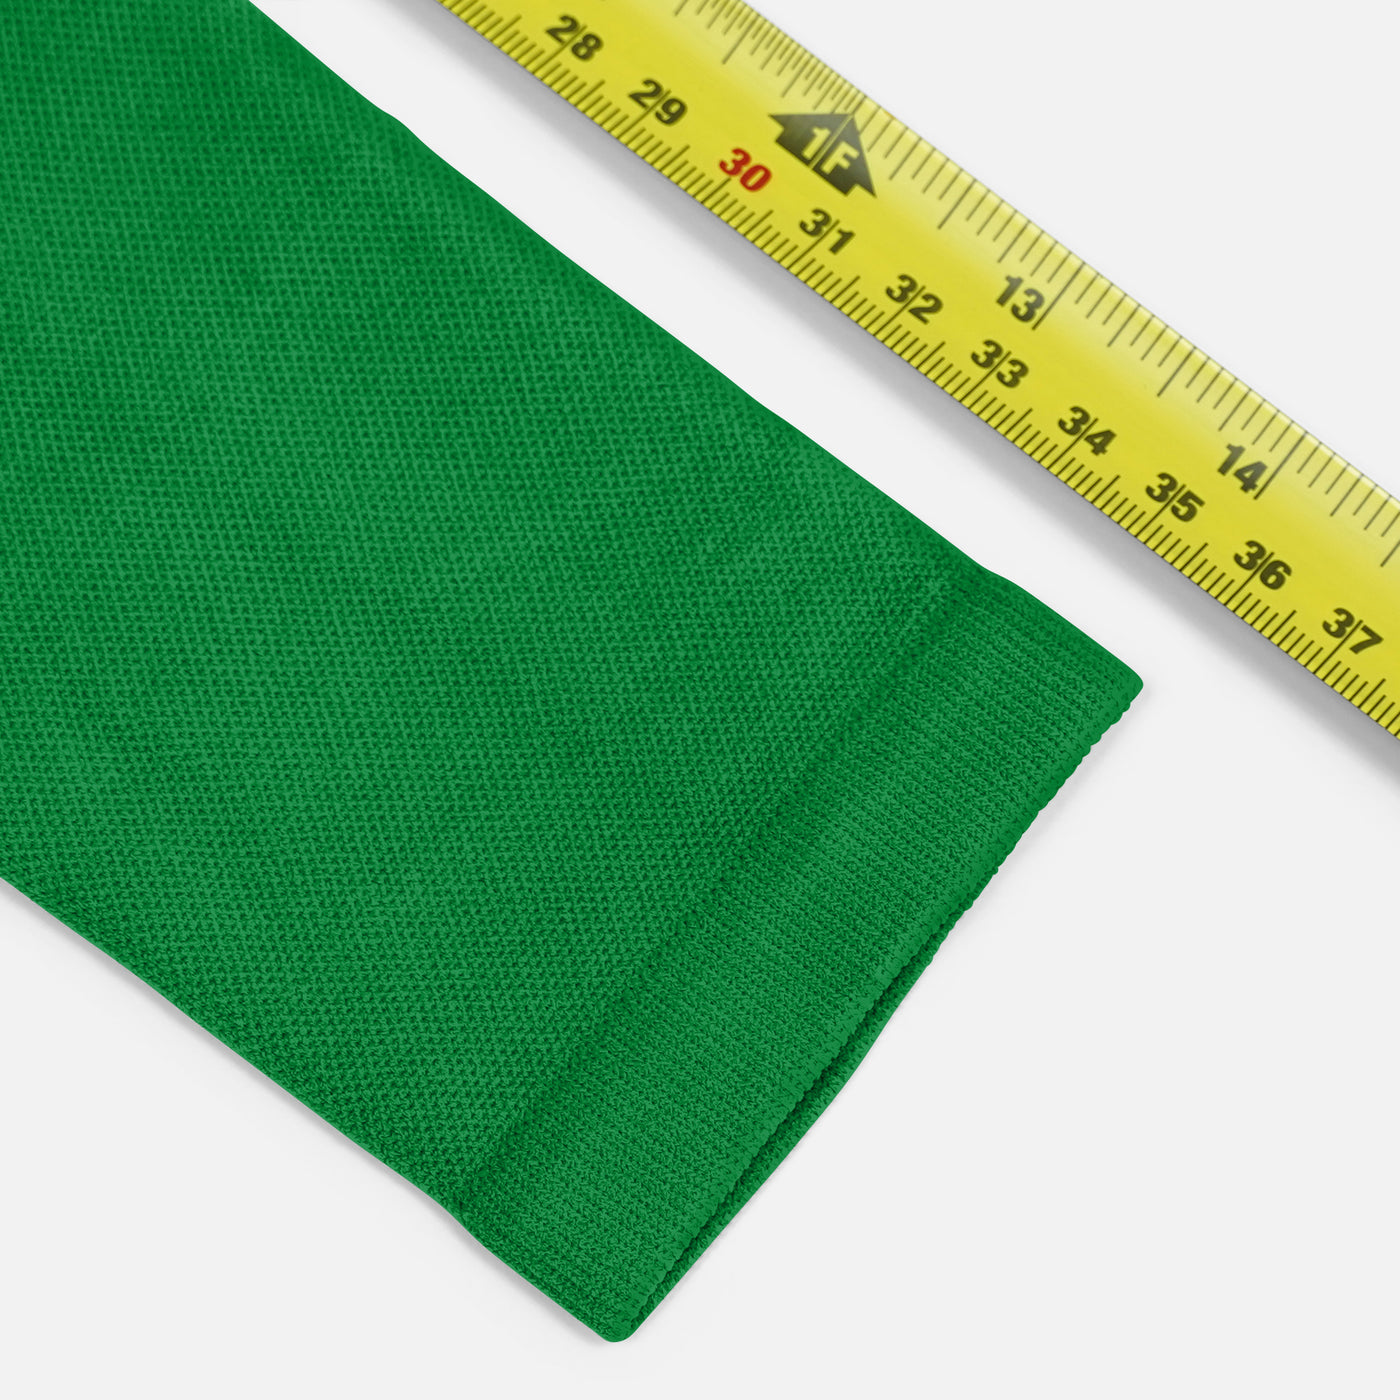 Hue Green One Size Fits All Football Arm Sleeve